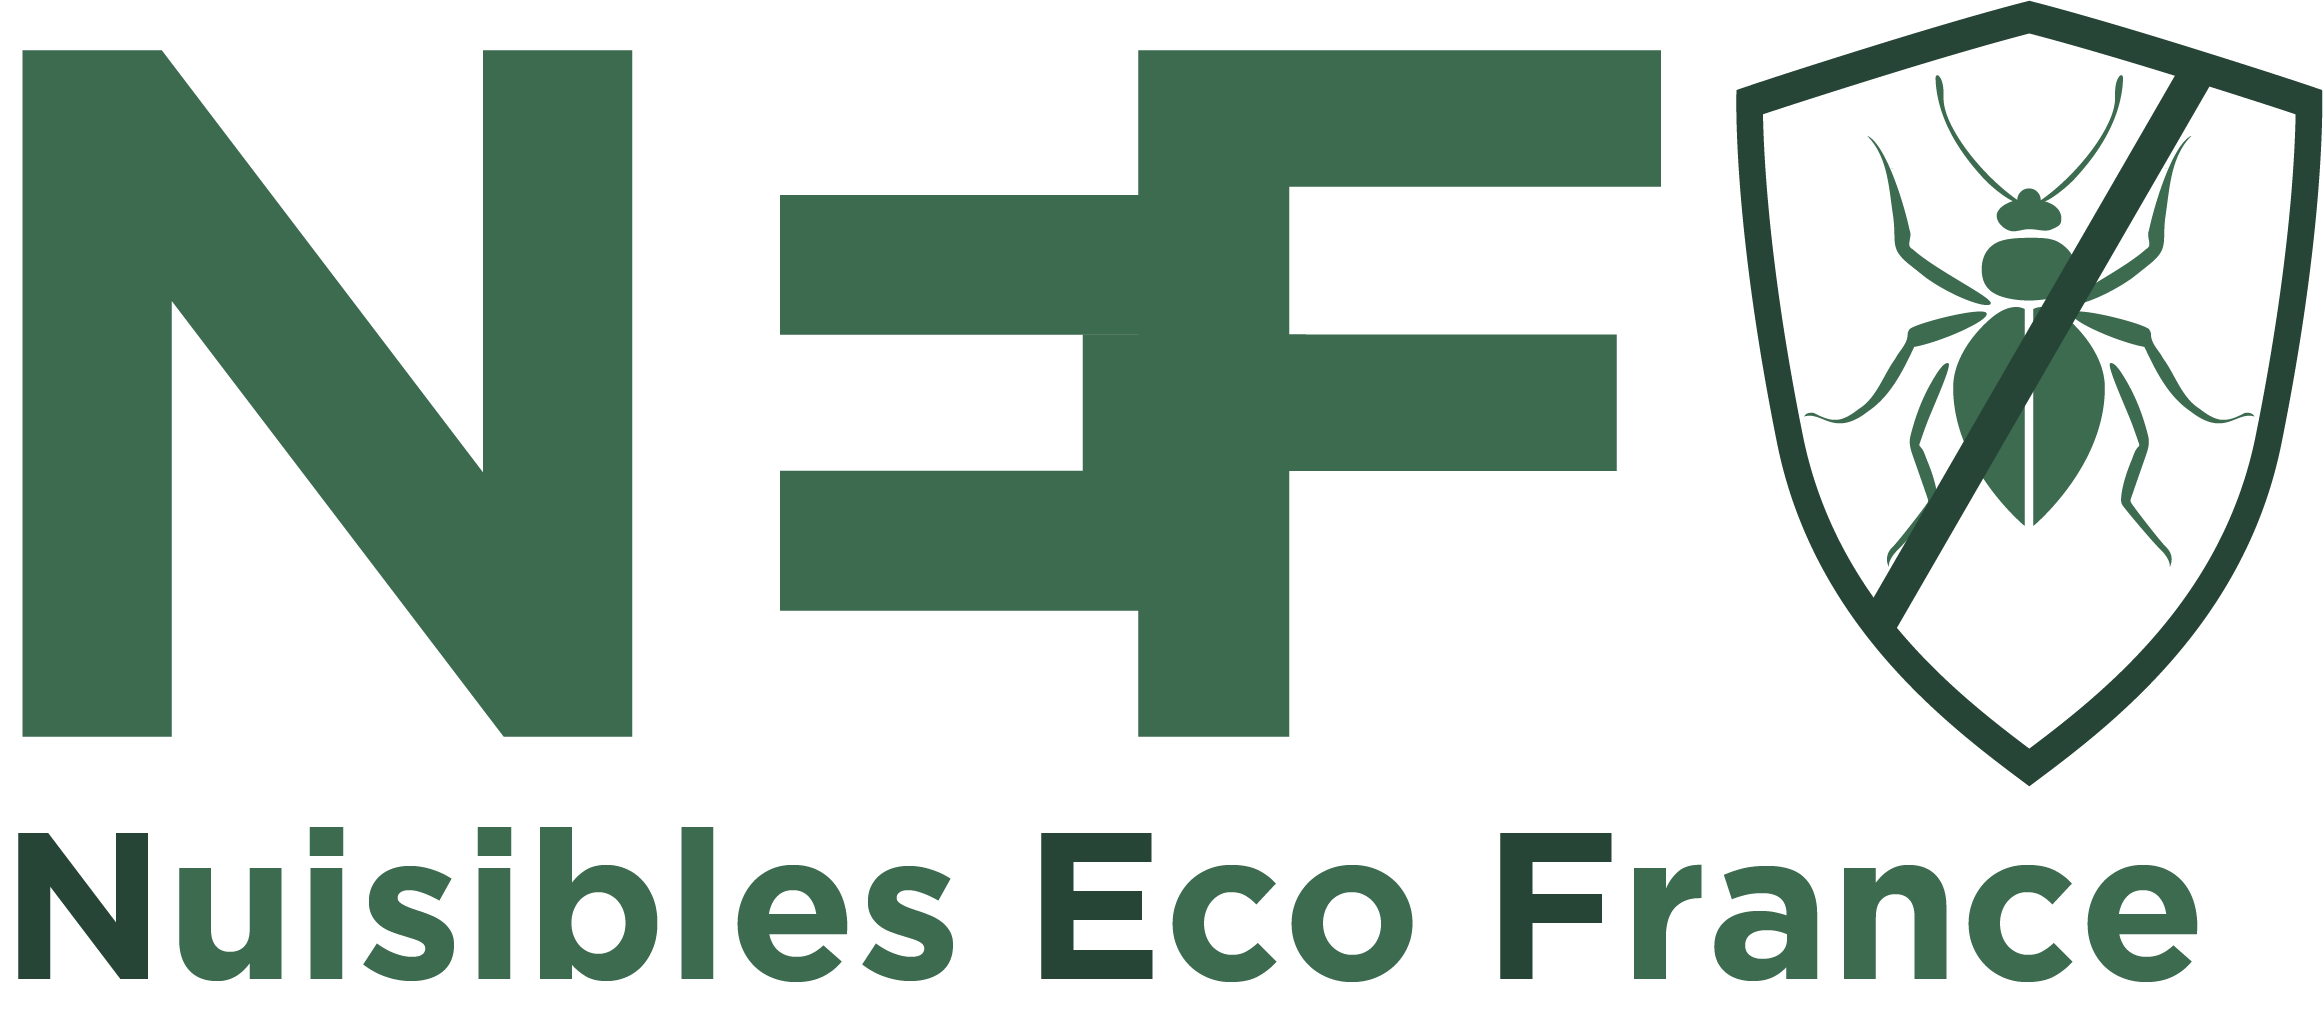 Nuisibles Eco France